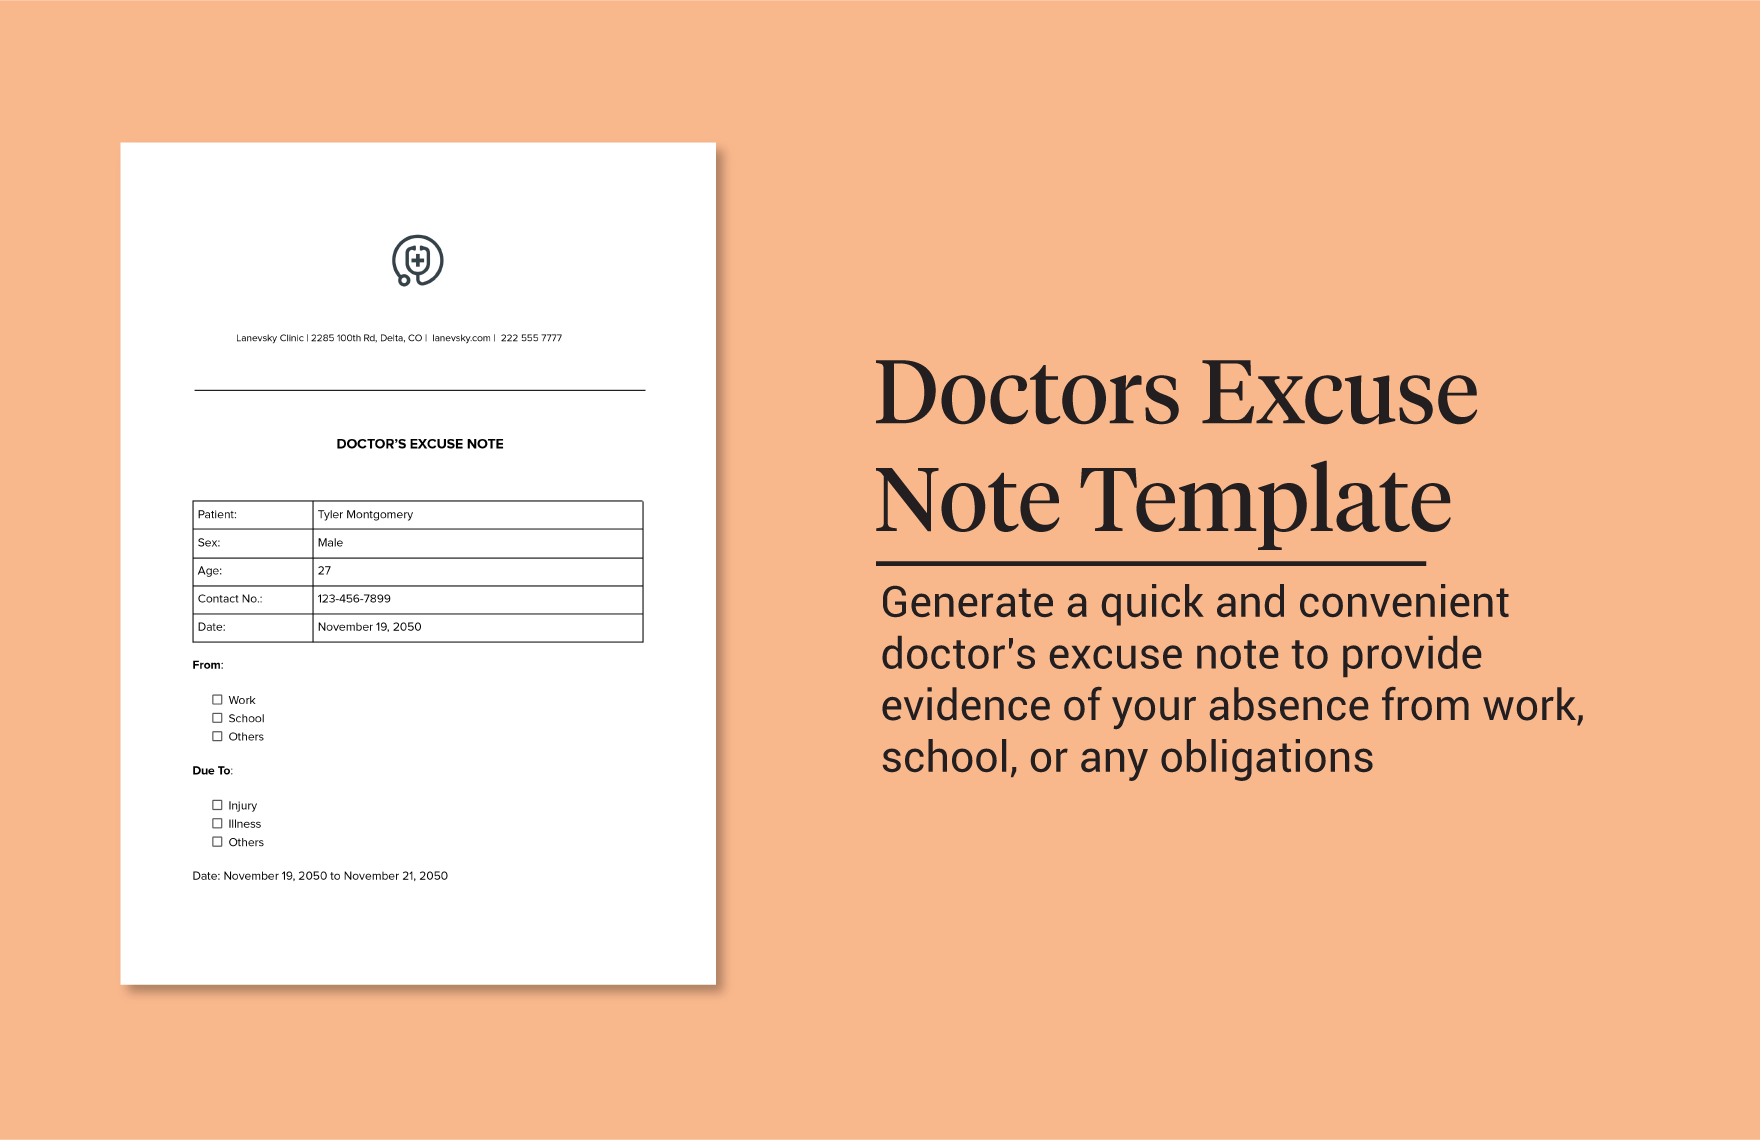 Doctors Excuse Note Template